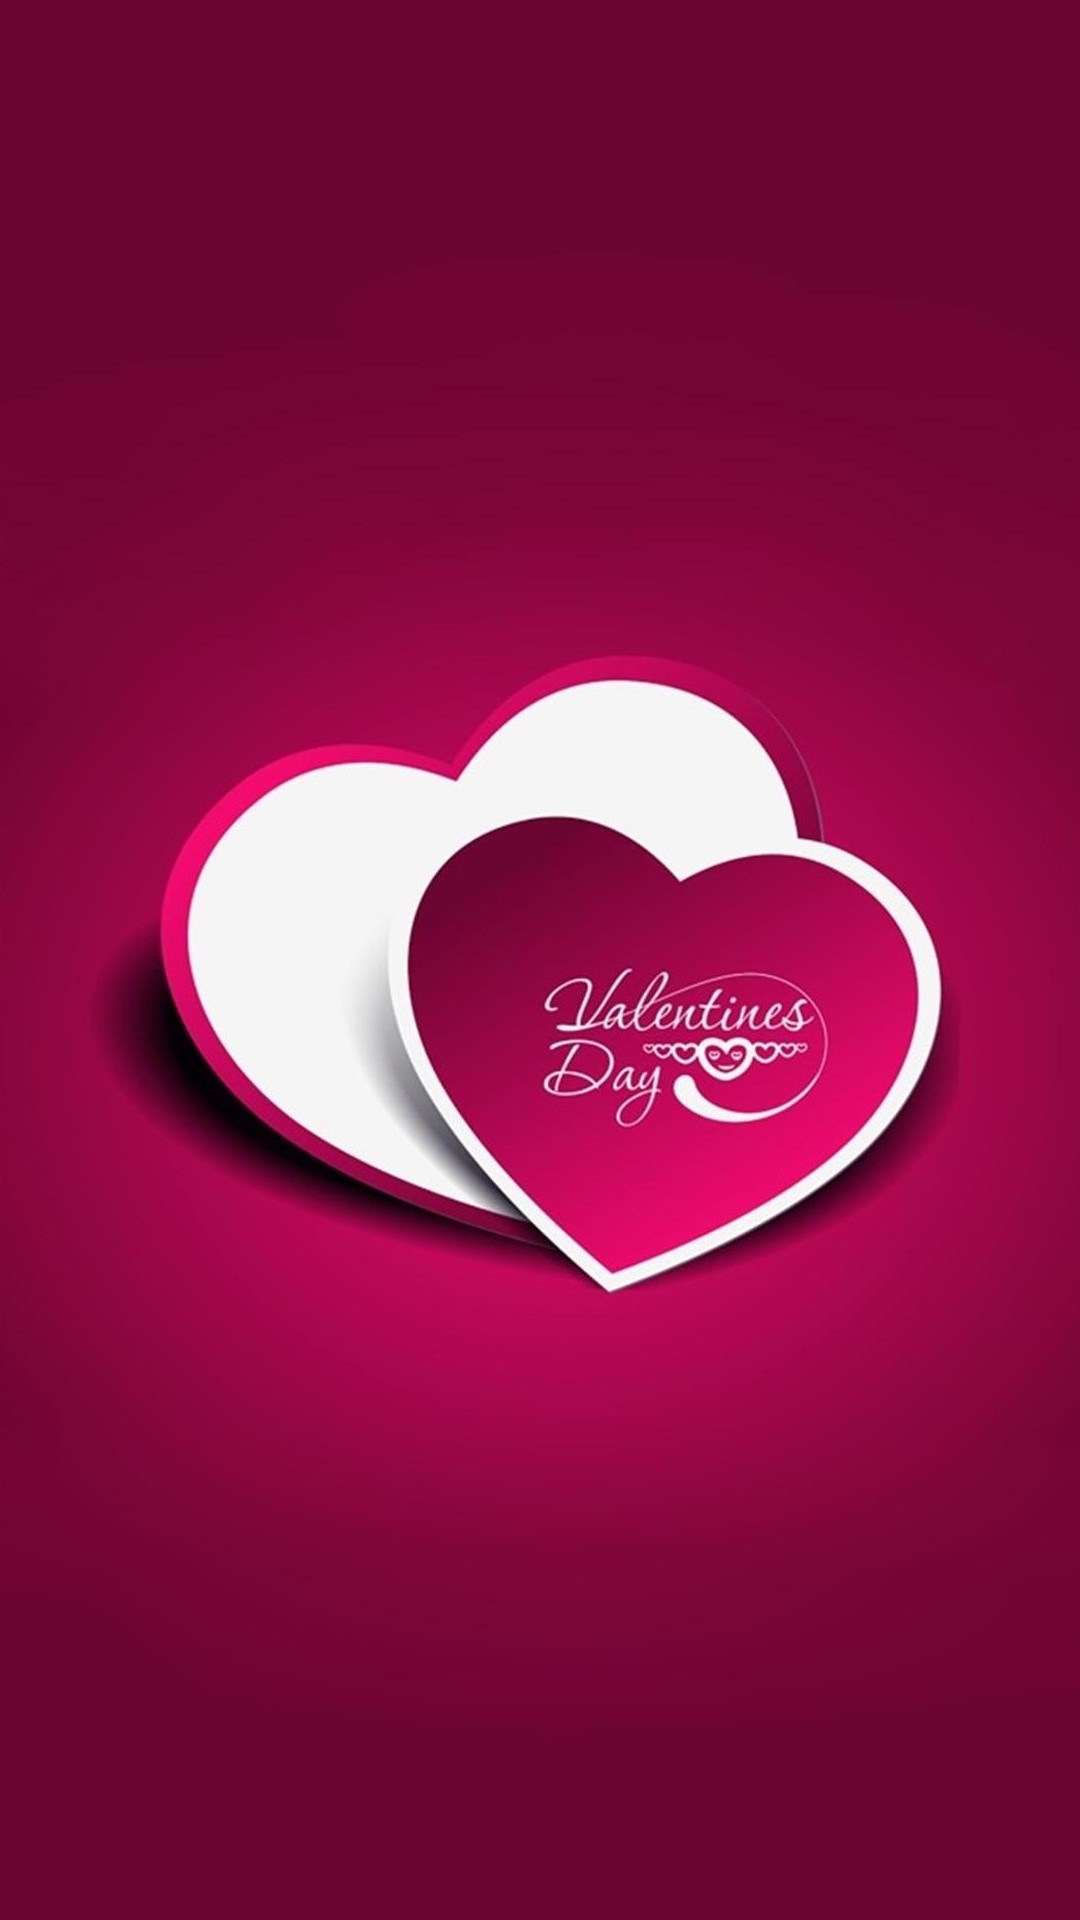 full hd love wallpapers for mobile,heart,pink,text,red,love